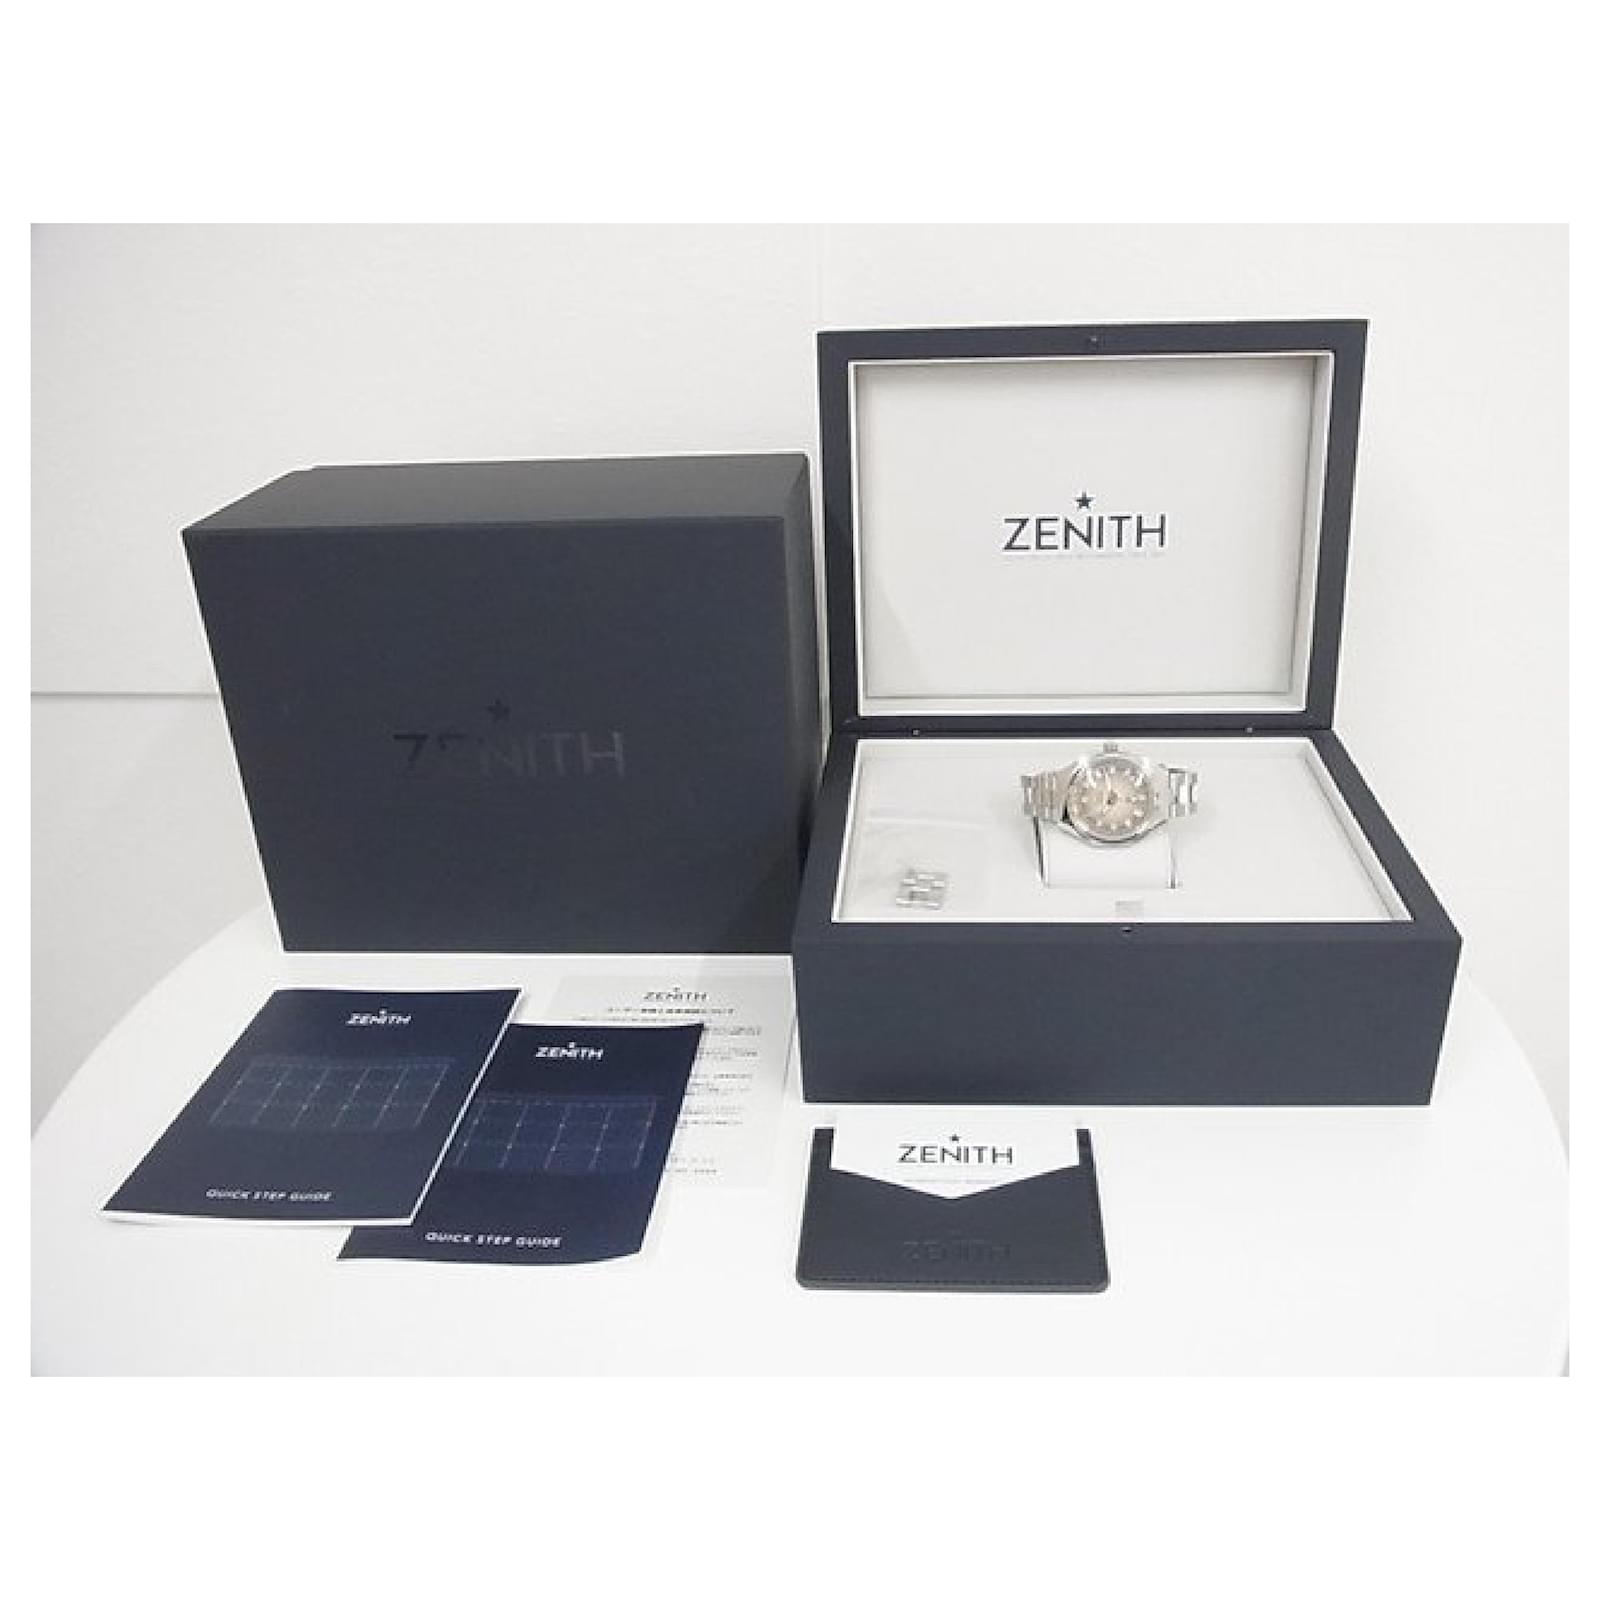 Zénith ZENITH Defy Revival A3642 250 Lot Limited '22 purchased